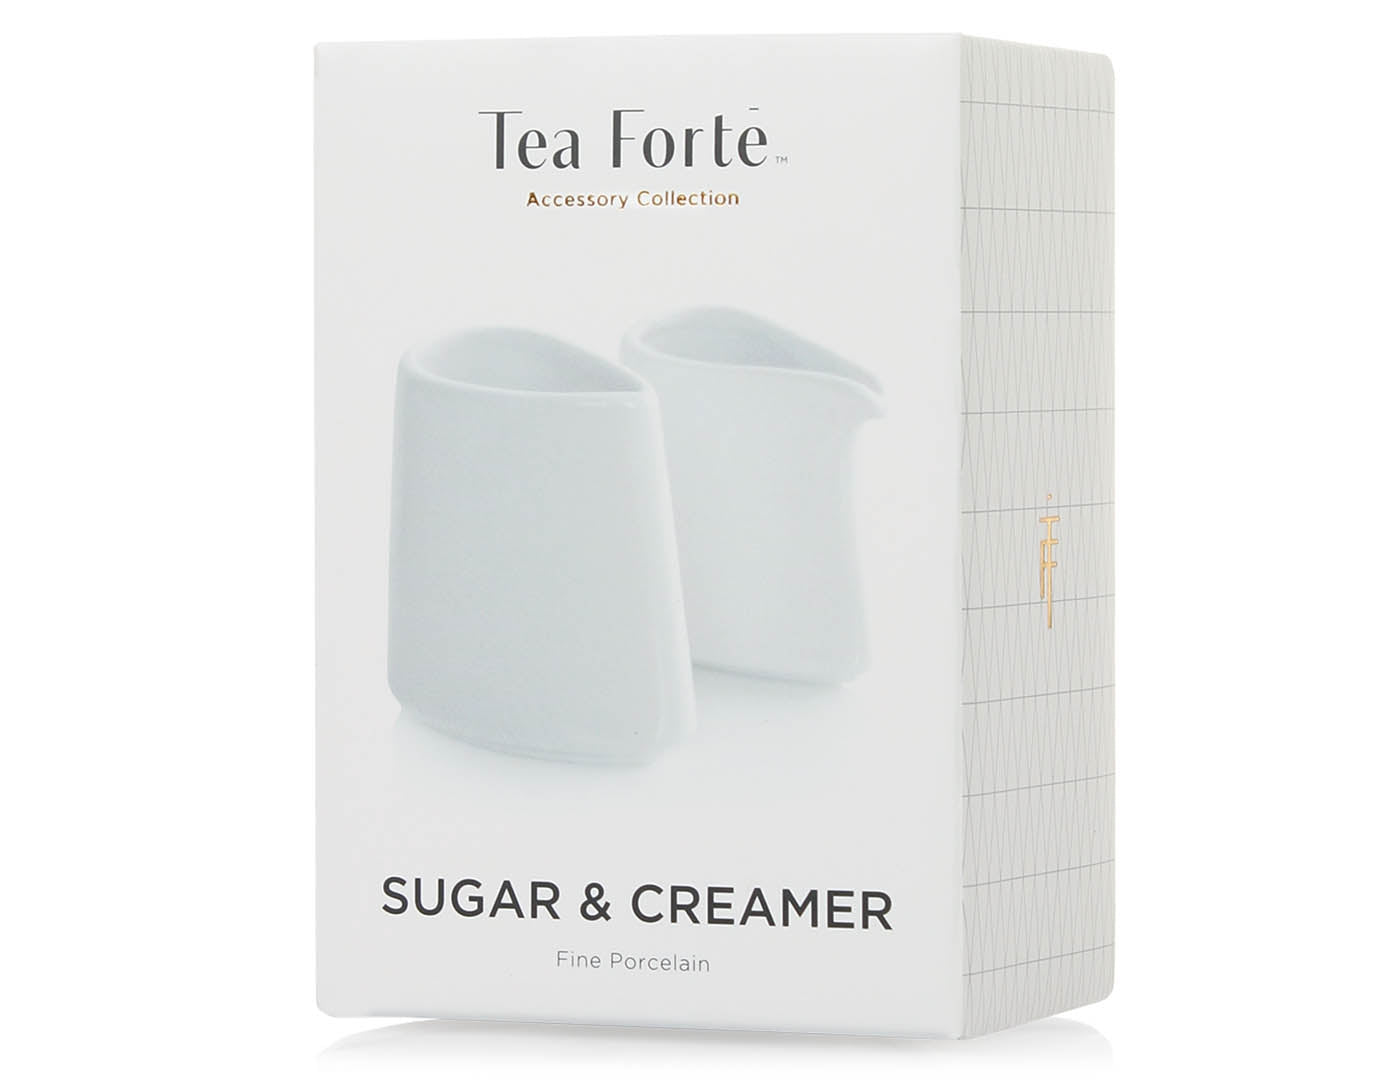 Sugar and creamer set of 2 showing packaging